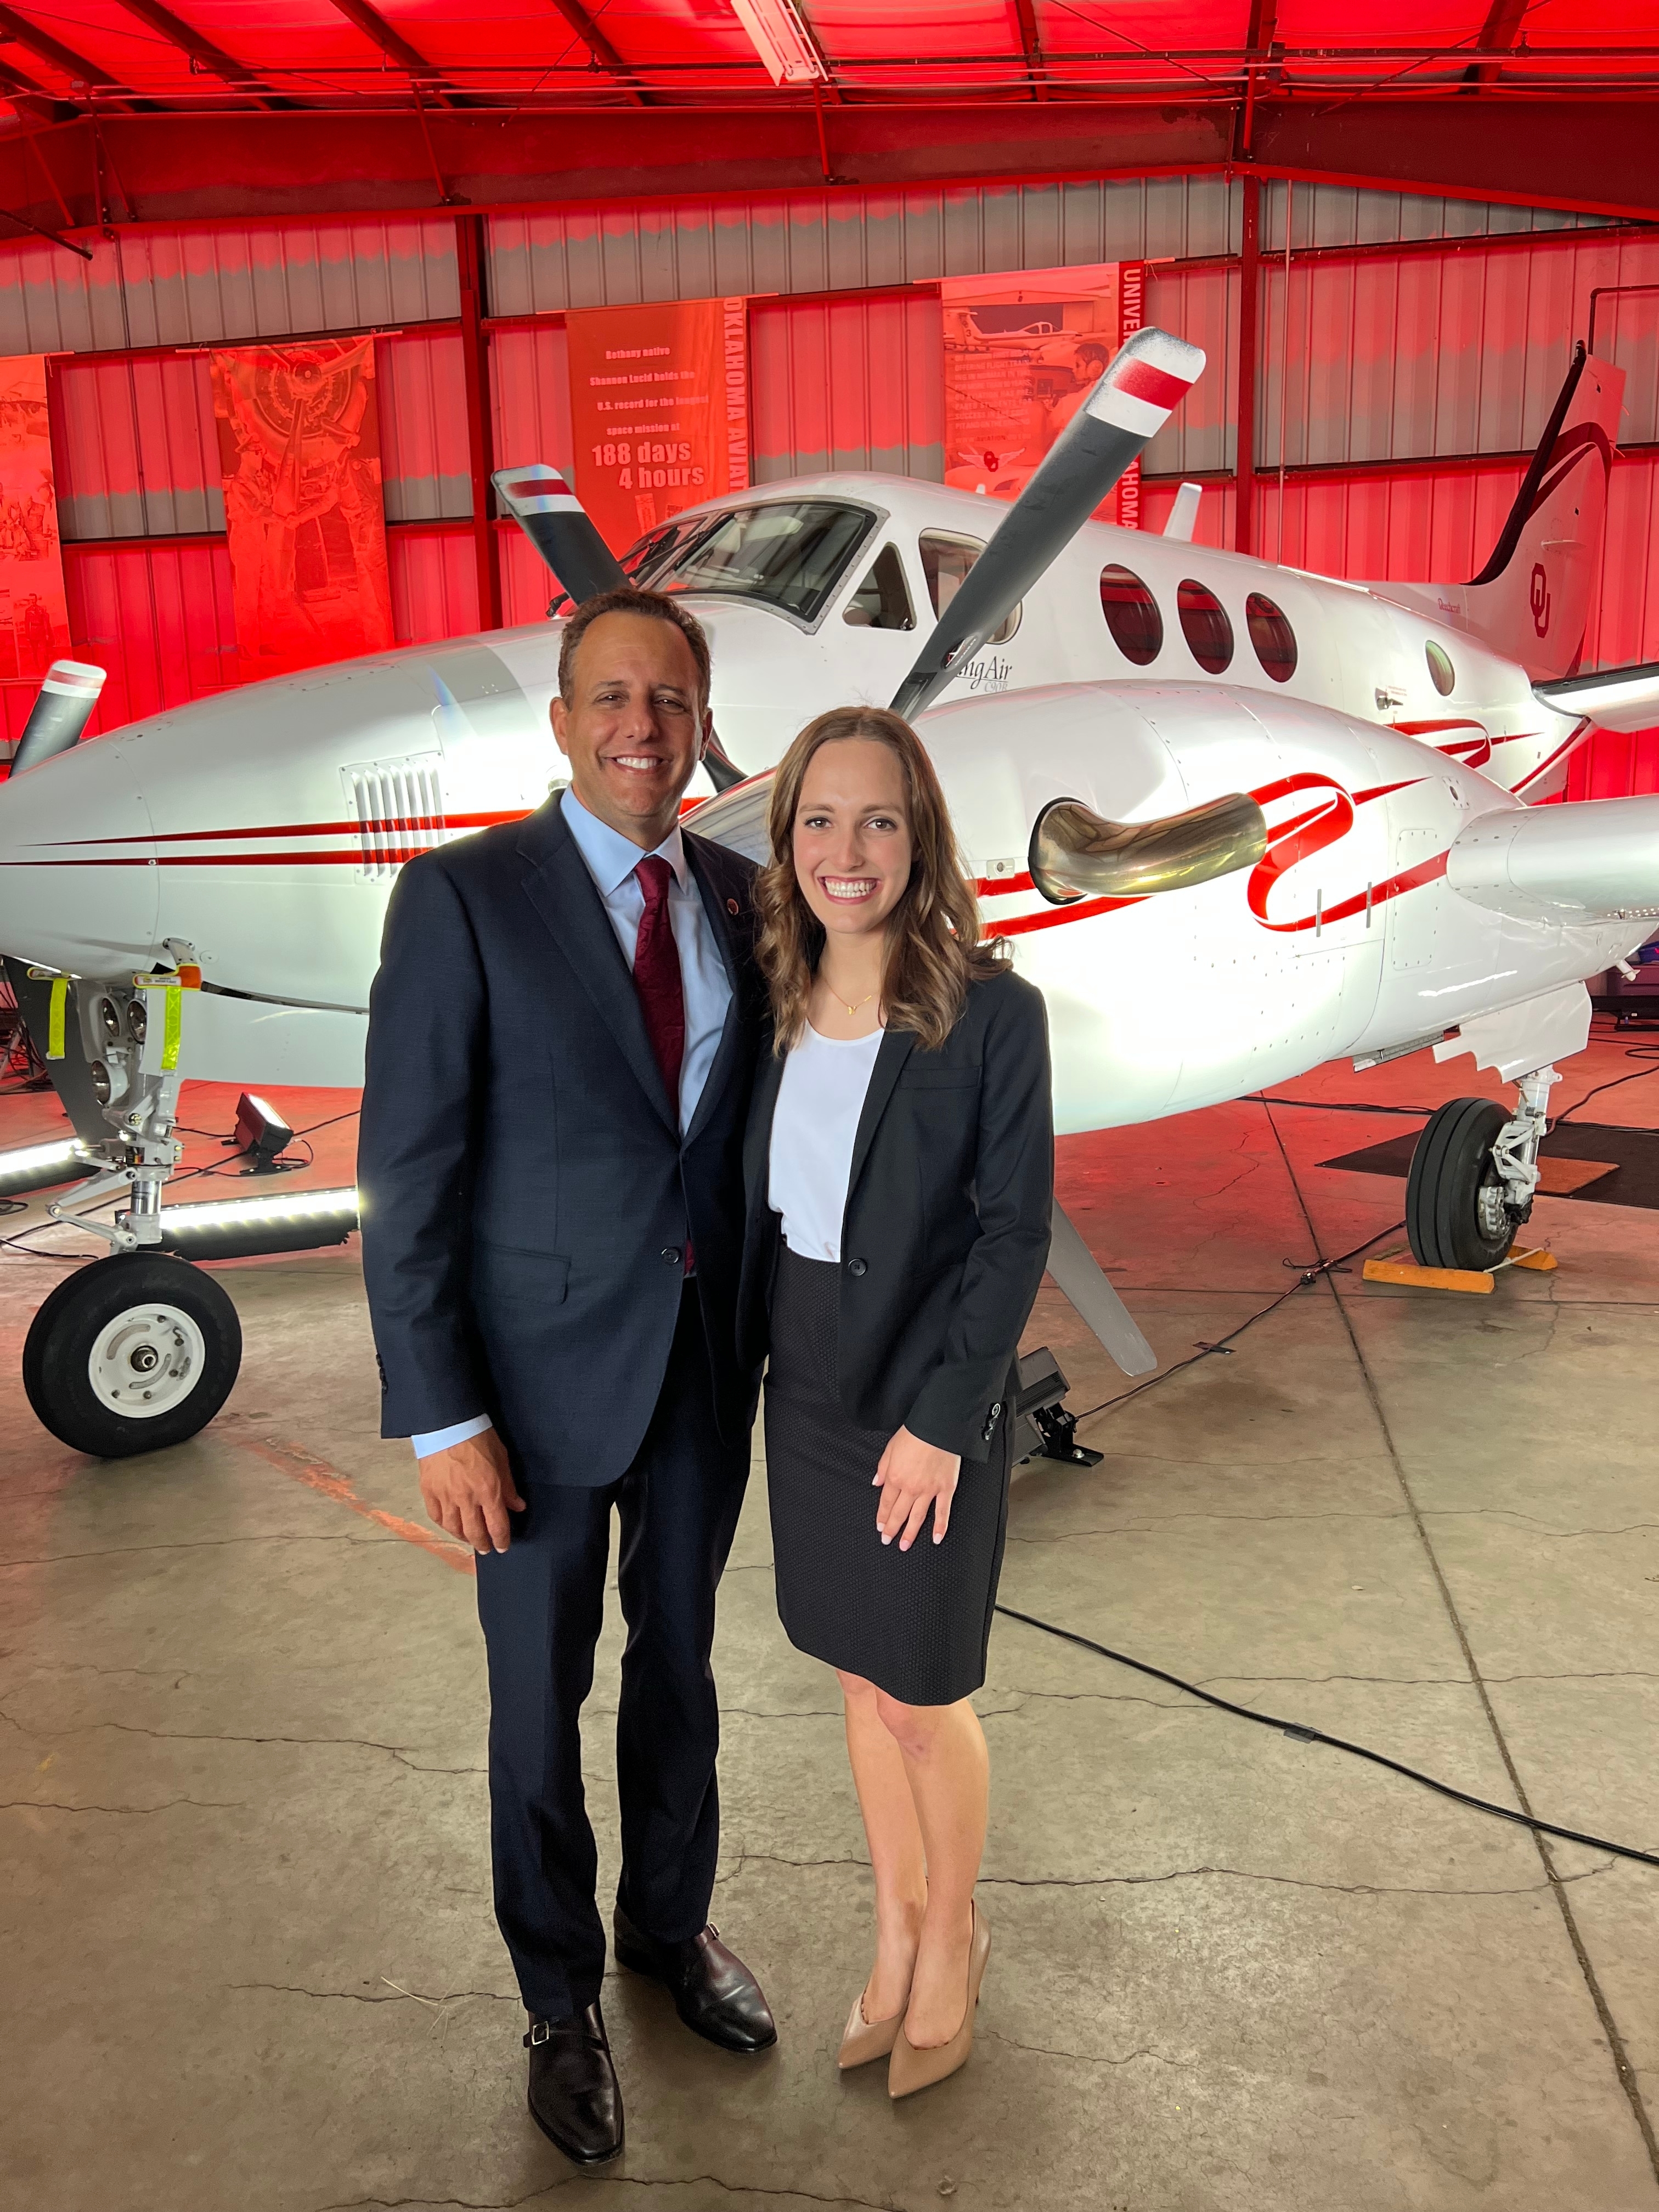 Lydia Koehler poses with OU President Joseph Harroz in front of the School of Aviation's King Air jet.